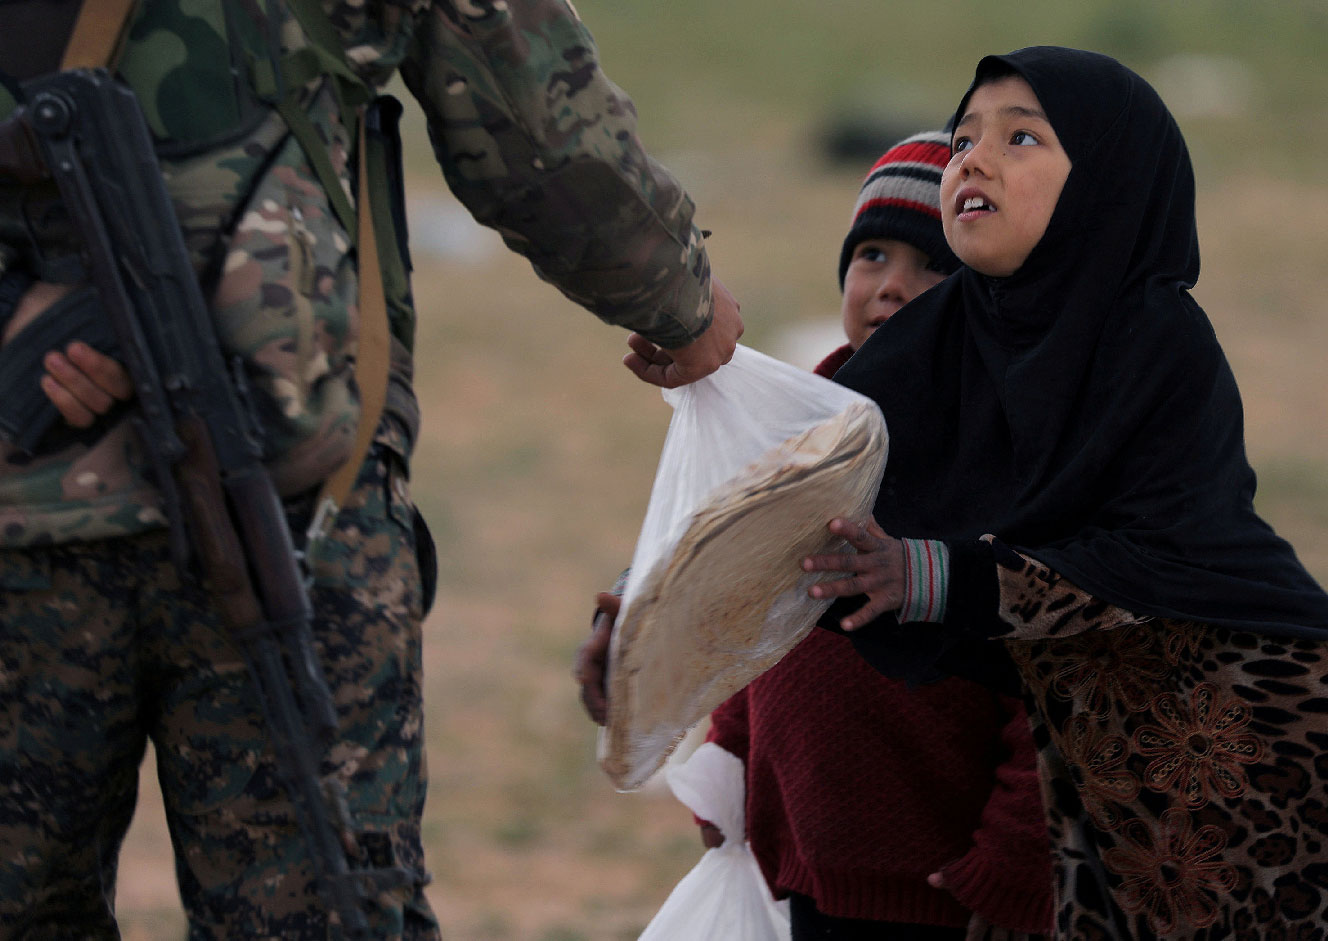 A girl takes a stack of bread from a fighter of Syrian Democratic Forces (SDF) near the village of Baghouz, Deir Al Zor province, Syria February 27, 2019.